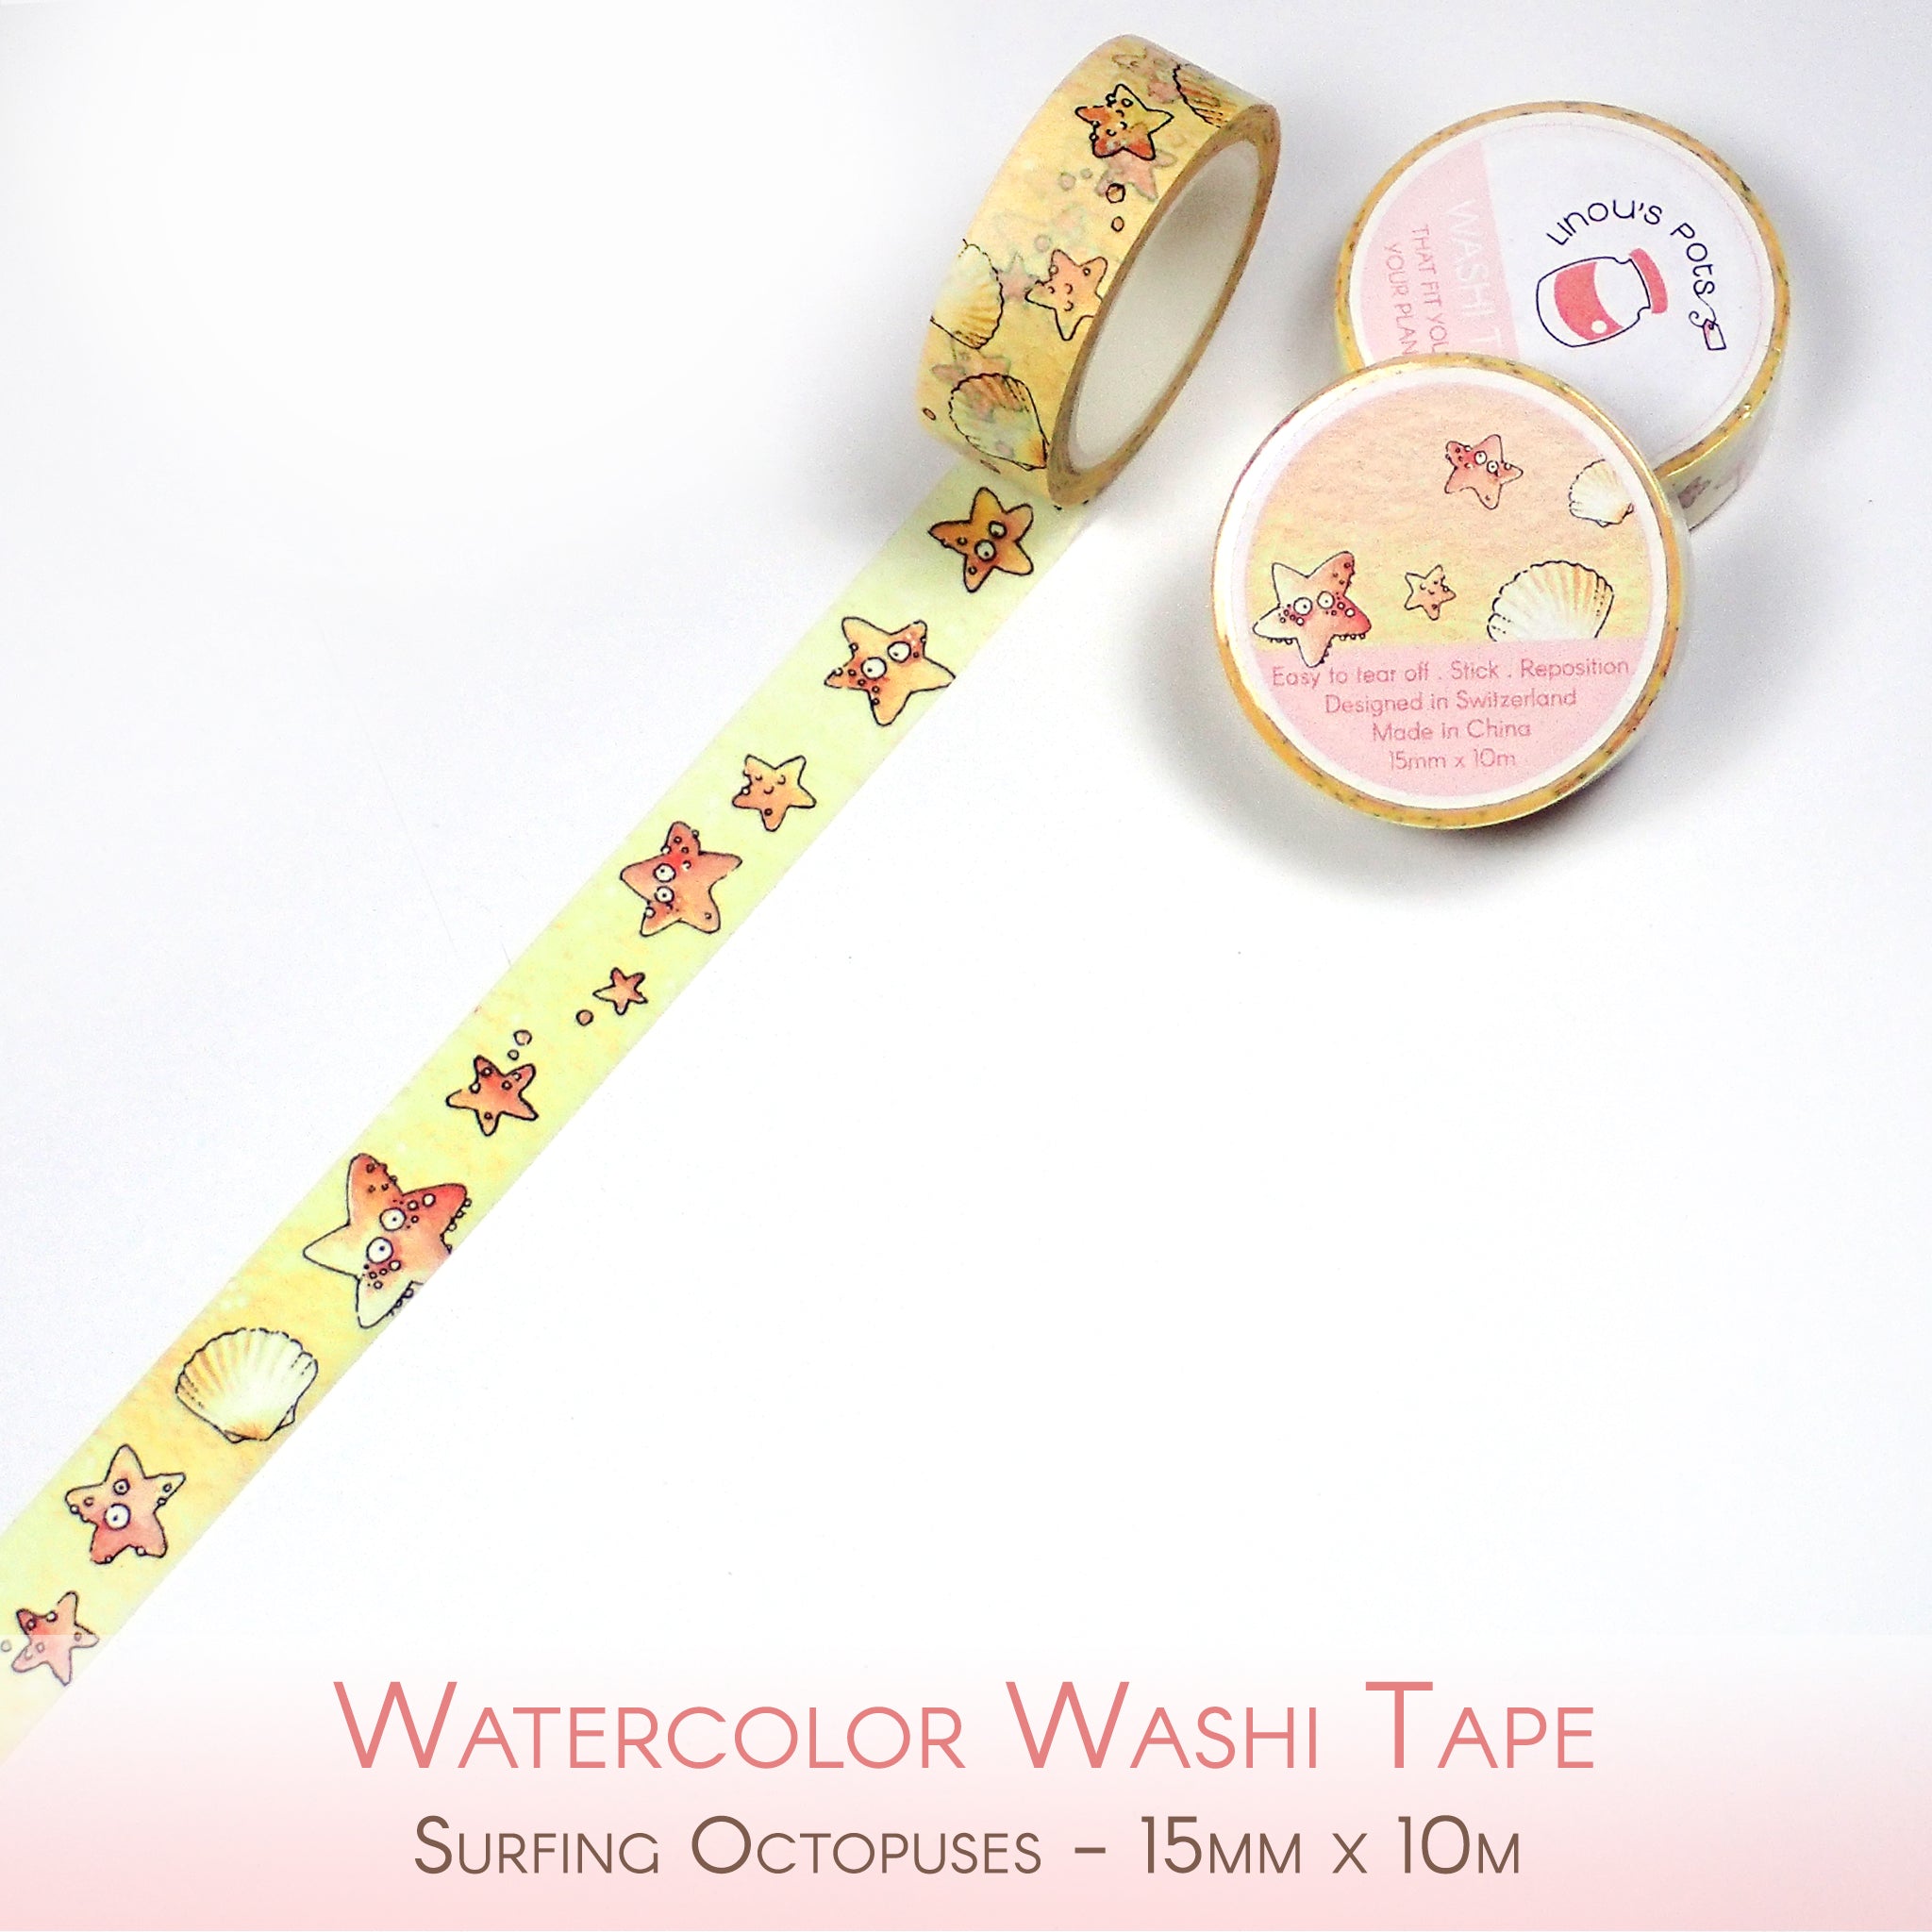 Surfing Octopuses - Watercolor Washi Tapes - Sea Stars and Shells